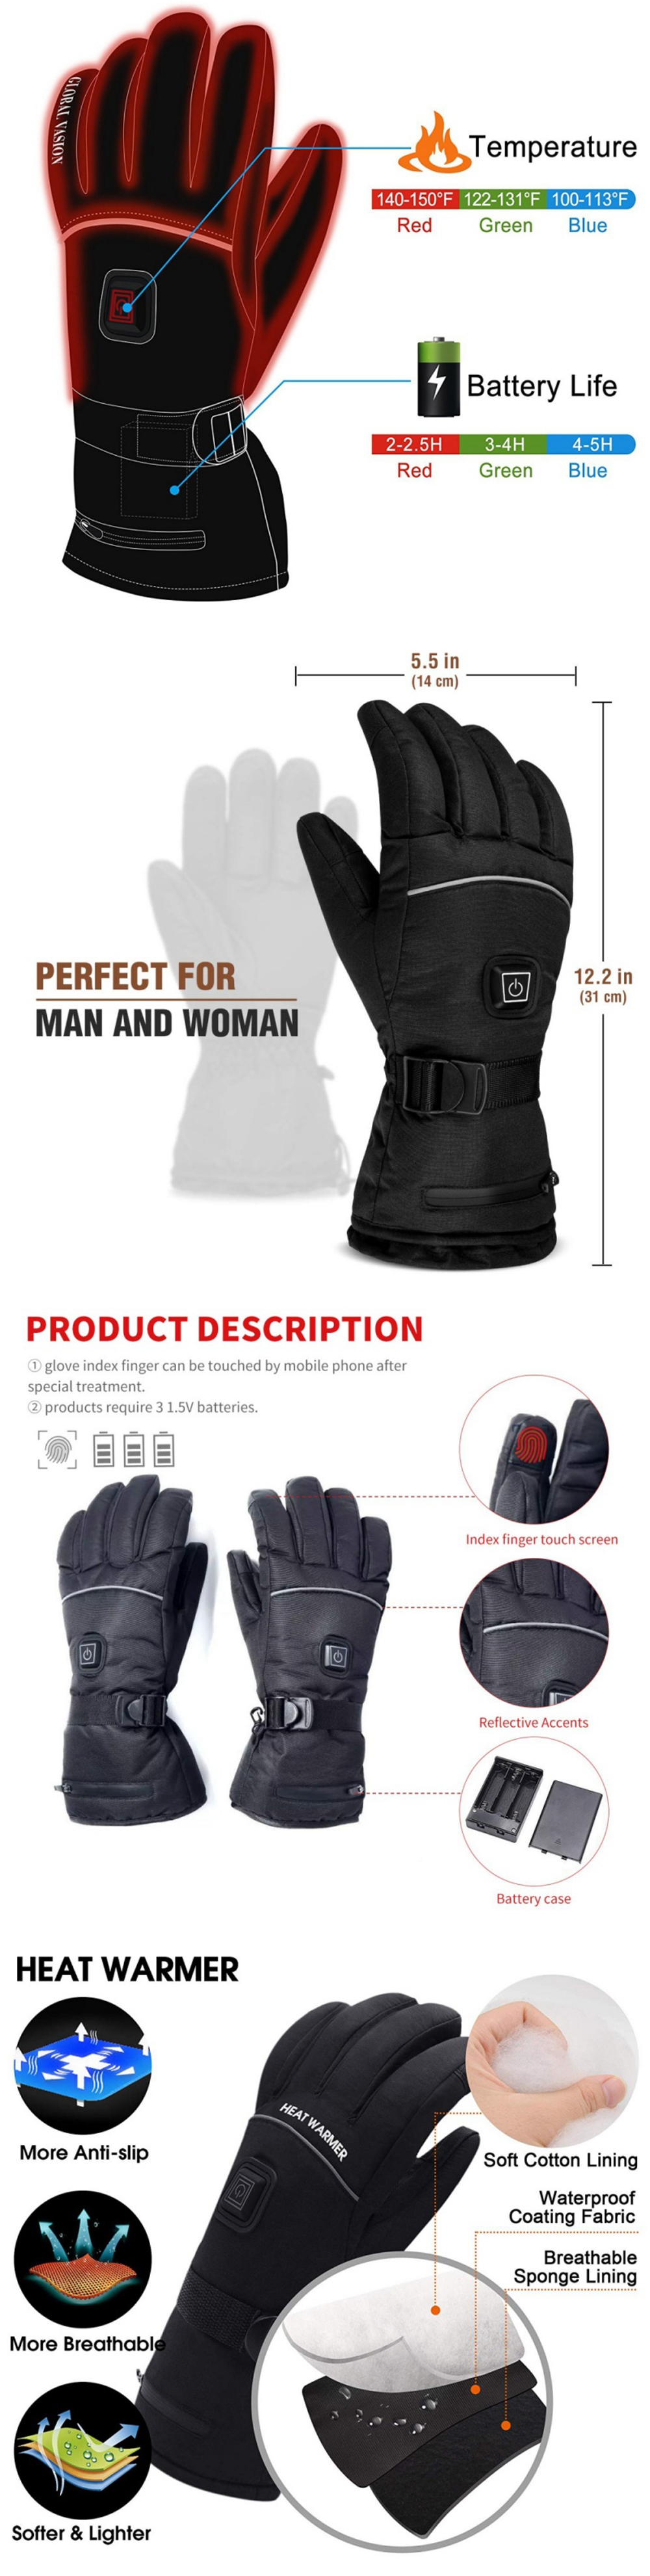 3-Modes-Electric-Heating-Built-in-Battery-Gloves-Control-Winter-Thermal-Ski-Motorcycle-Gloves-Waterp-1755496-2